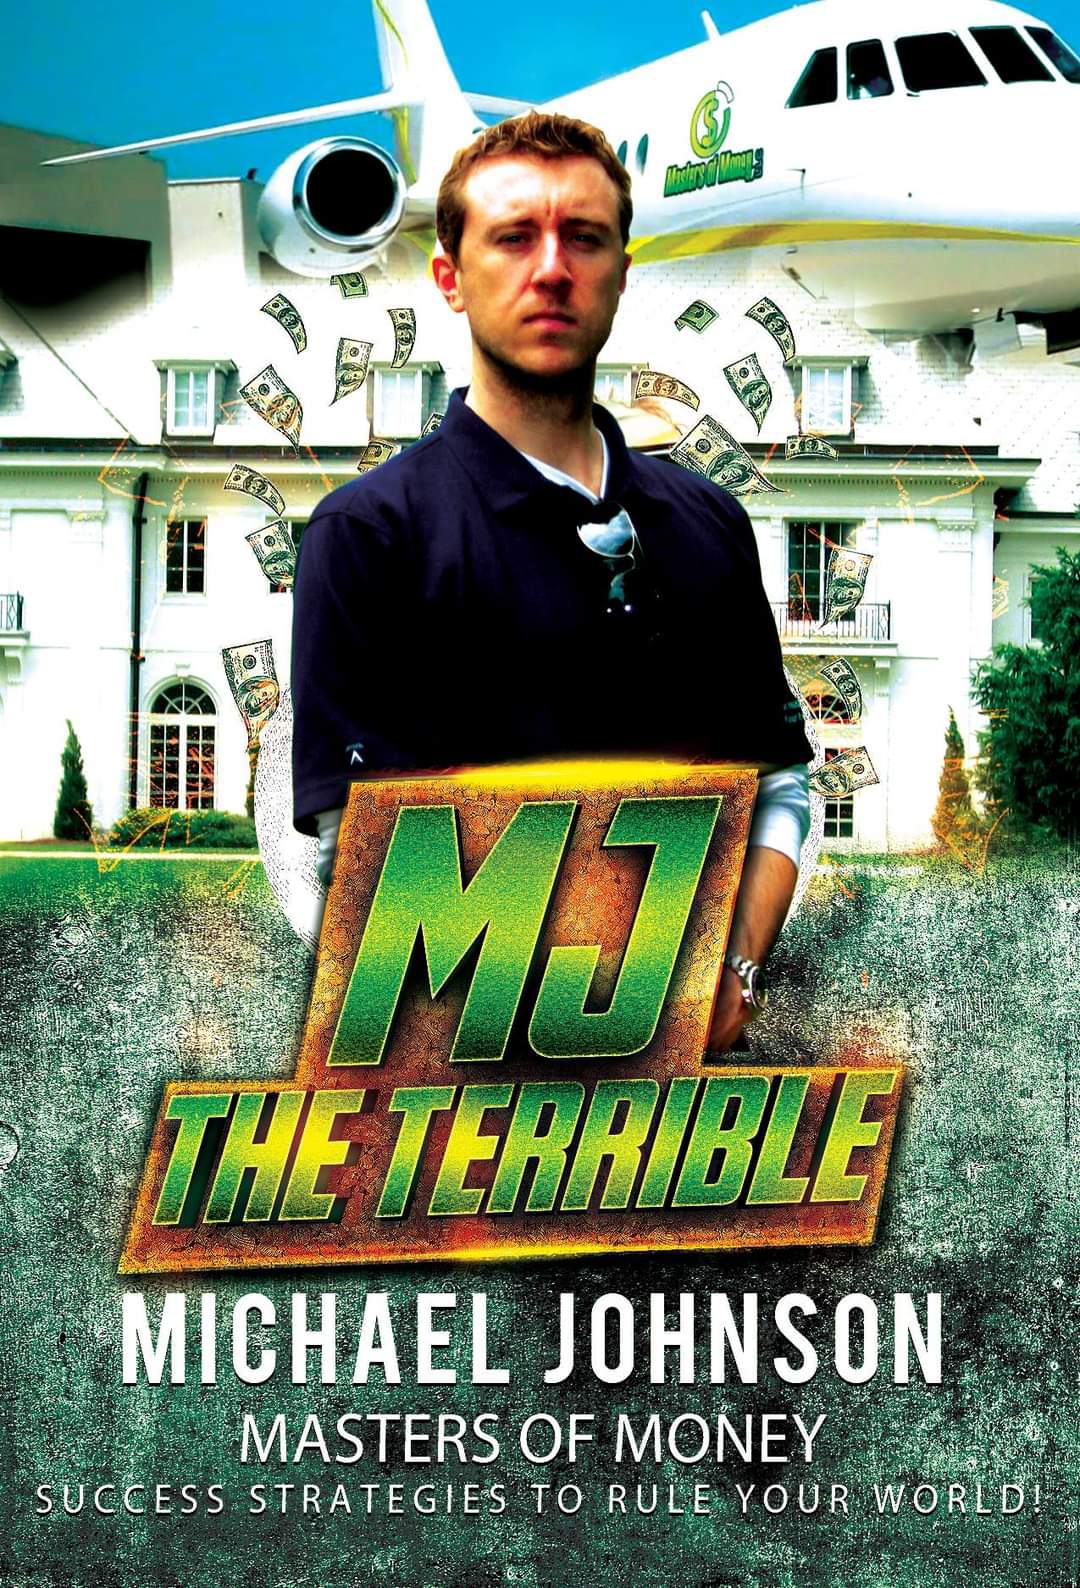 Michael "MJ The Terrible" Johnson and Masters of Money LLC Collage Poster